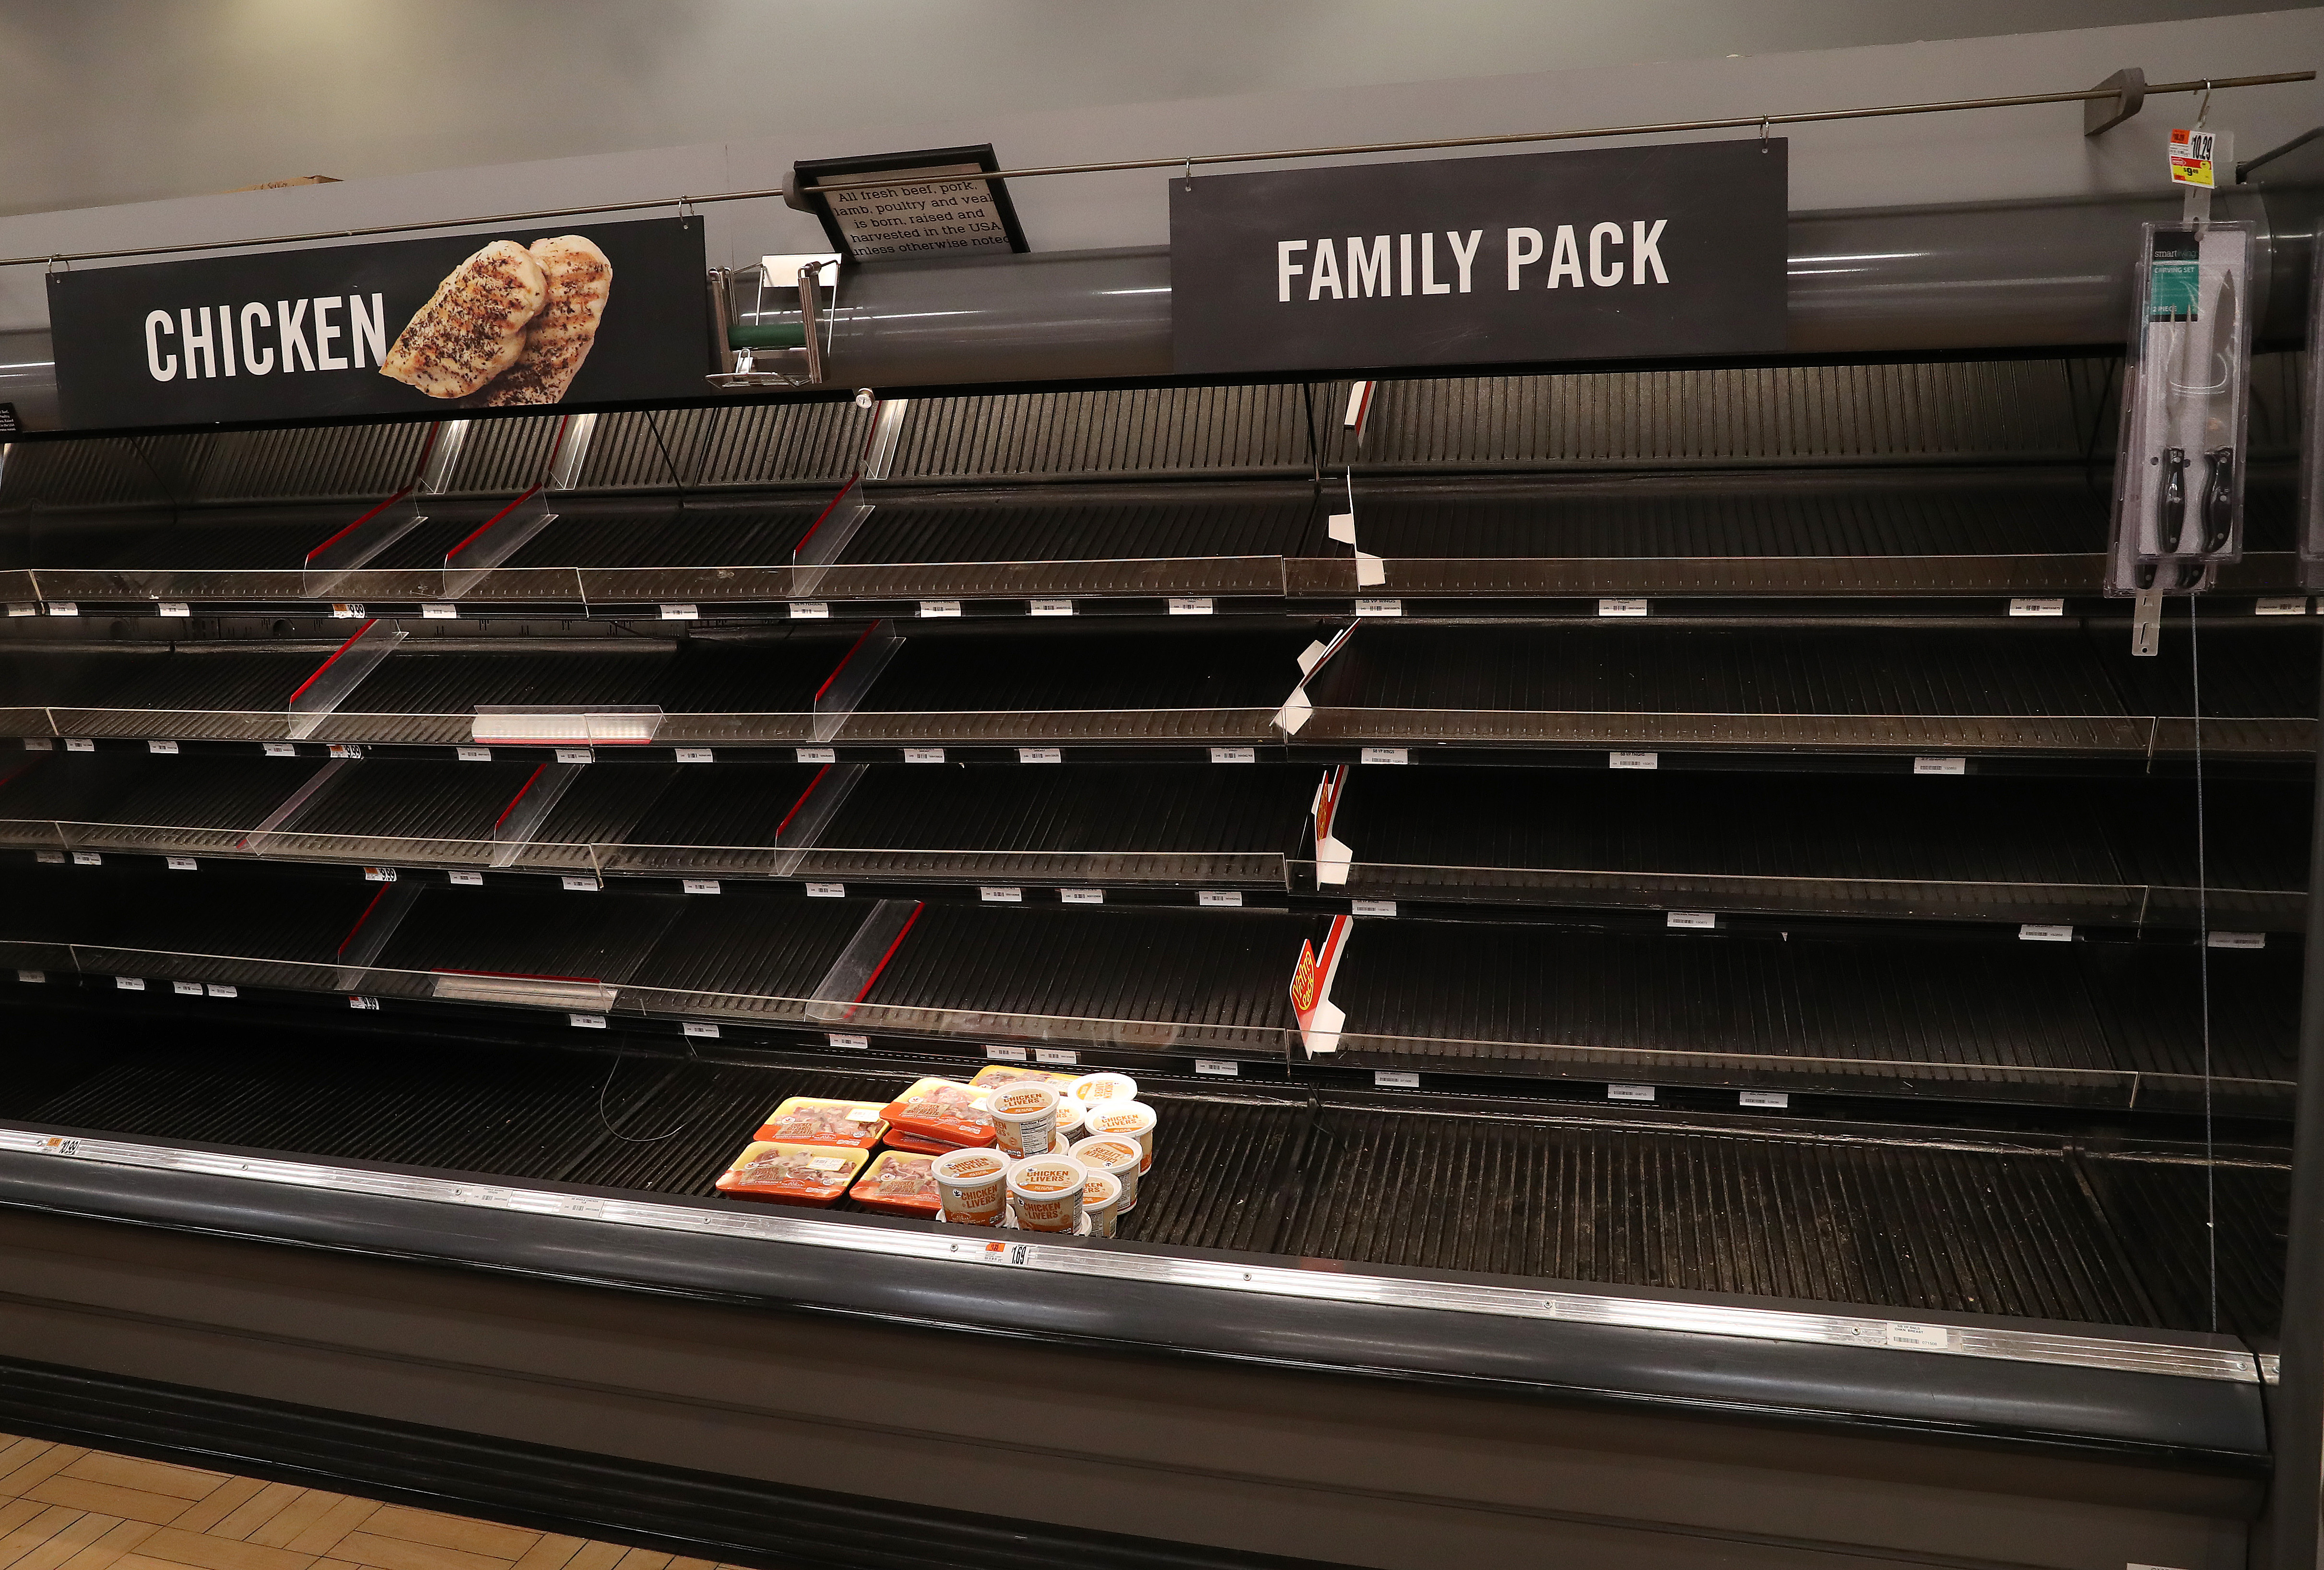 Shelves normally stocked with meat sit empty at a Giant grocery store in Dunkirk, Maryland, on March 13.